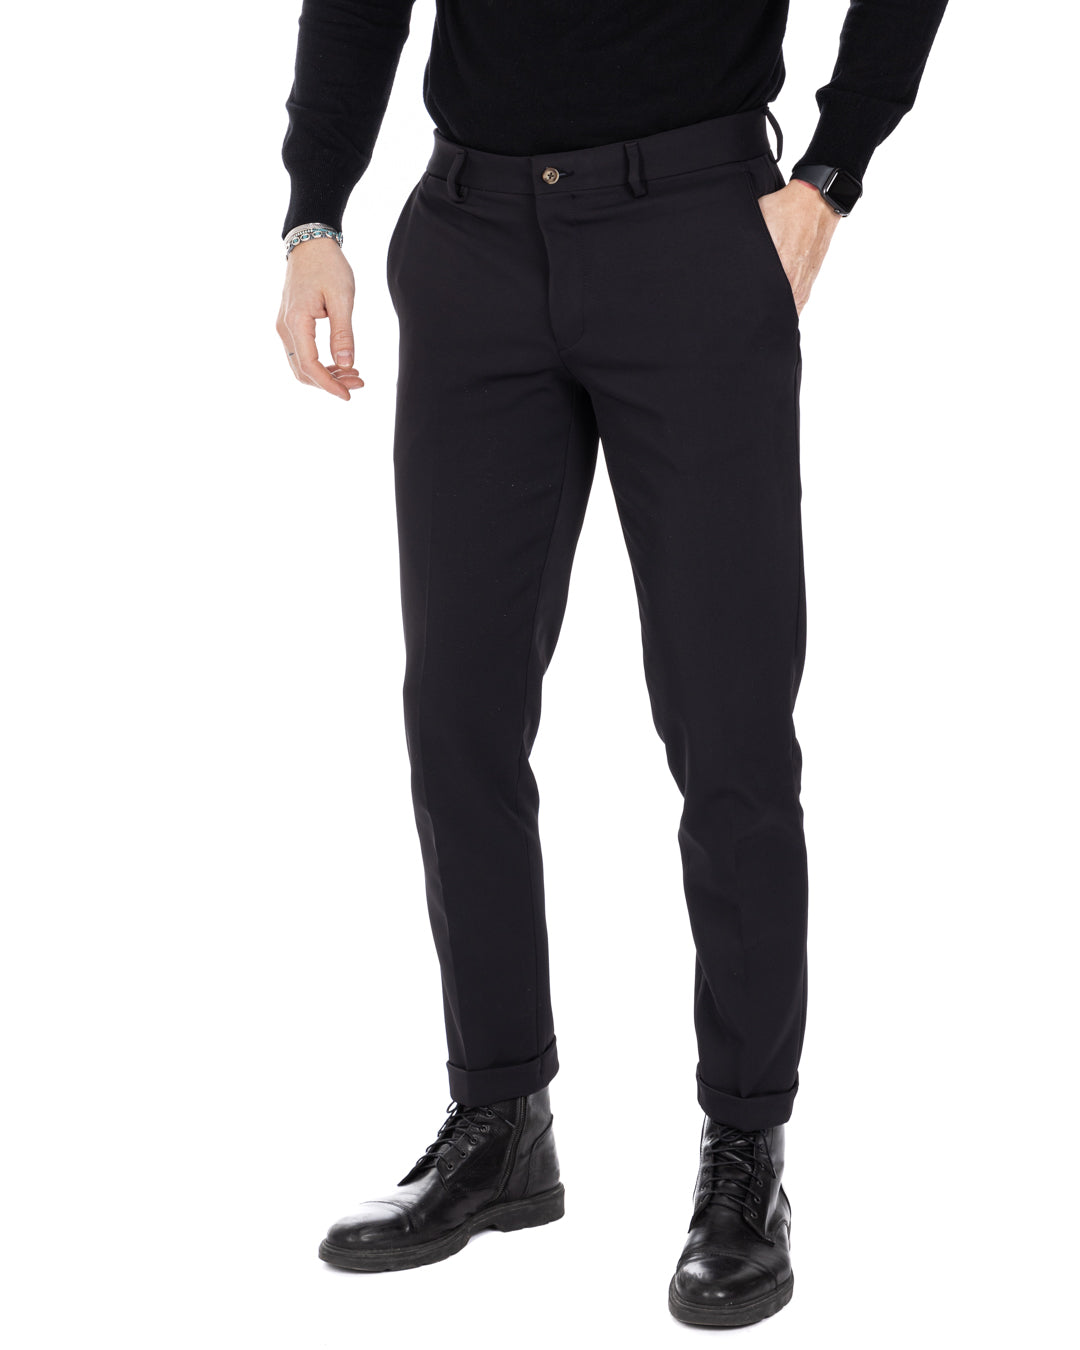 Smith - black technical trousers